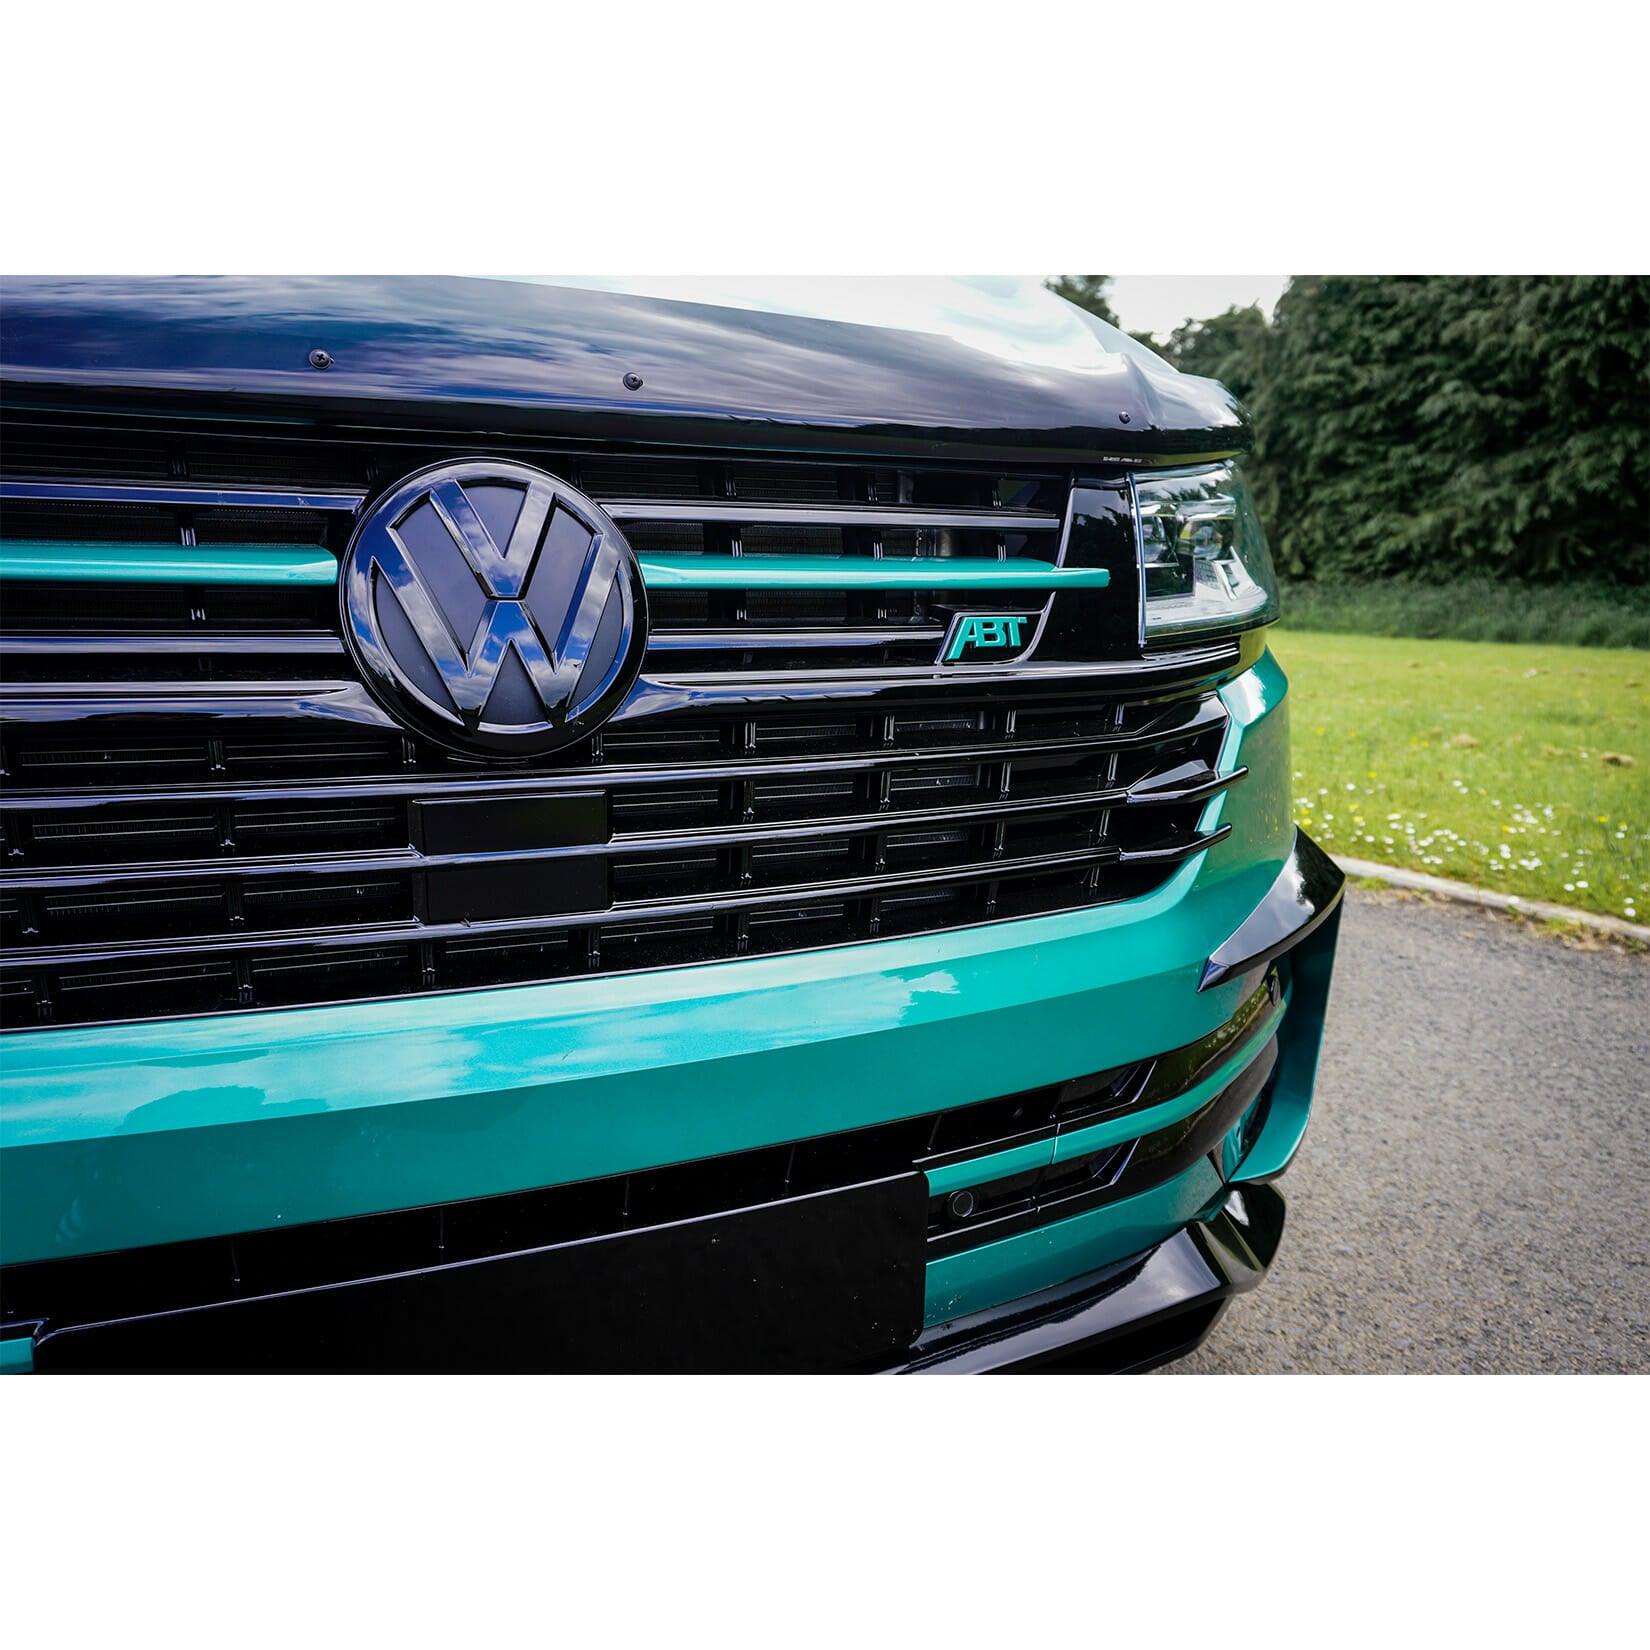 VW TRANSPORTER T6.1 2019 ON - ABT FRONT GRILLE ADD-ON - Storm Xccessories2